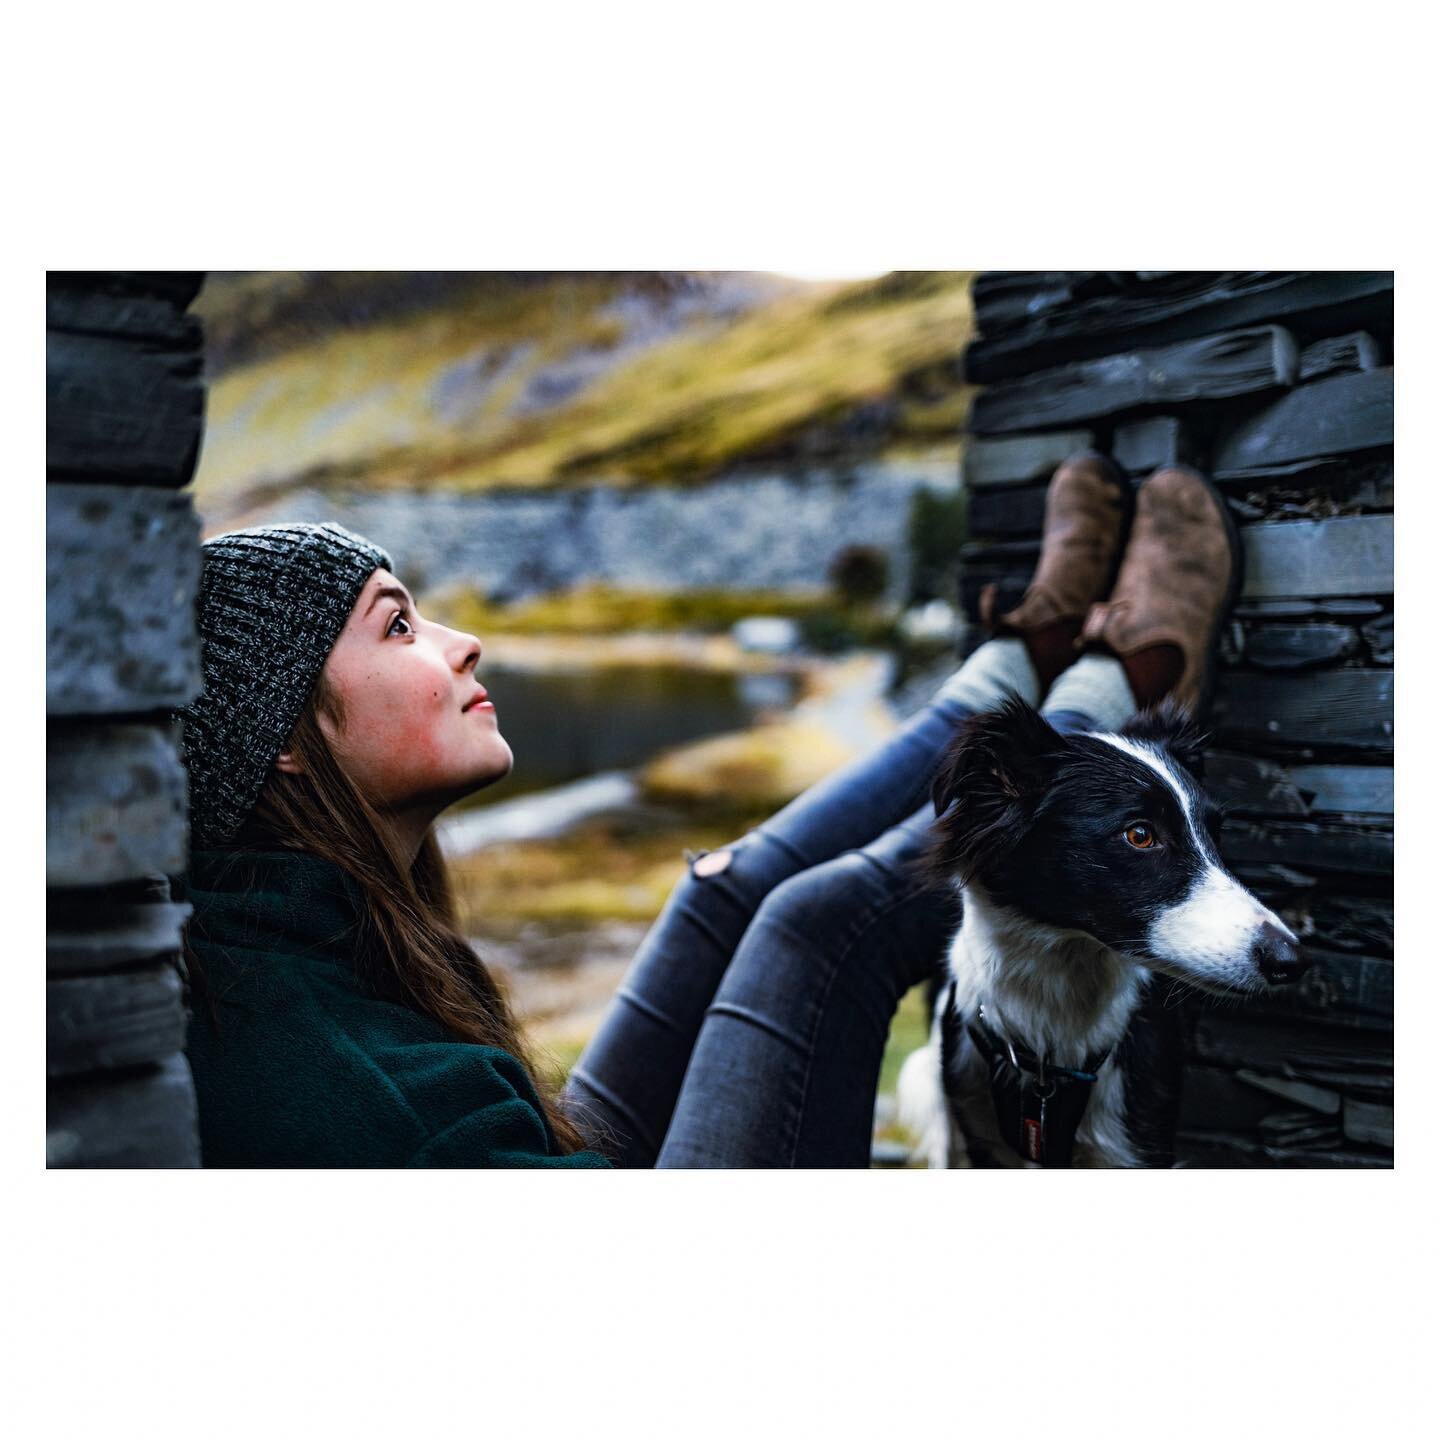 Break time with @jazzysjourneys
Where ever Jasmine goes, Ivy her collie/lurcher isn&rsquo;t far behind. There are some connections between owners and their dogs that are really special ... 

#snowdonia #cwmorthinquarry @blundstone_uk